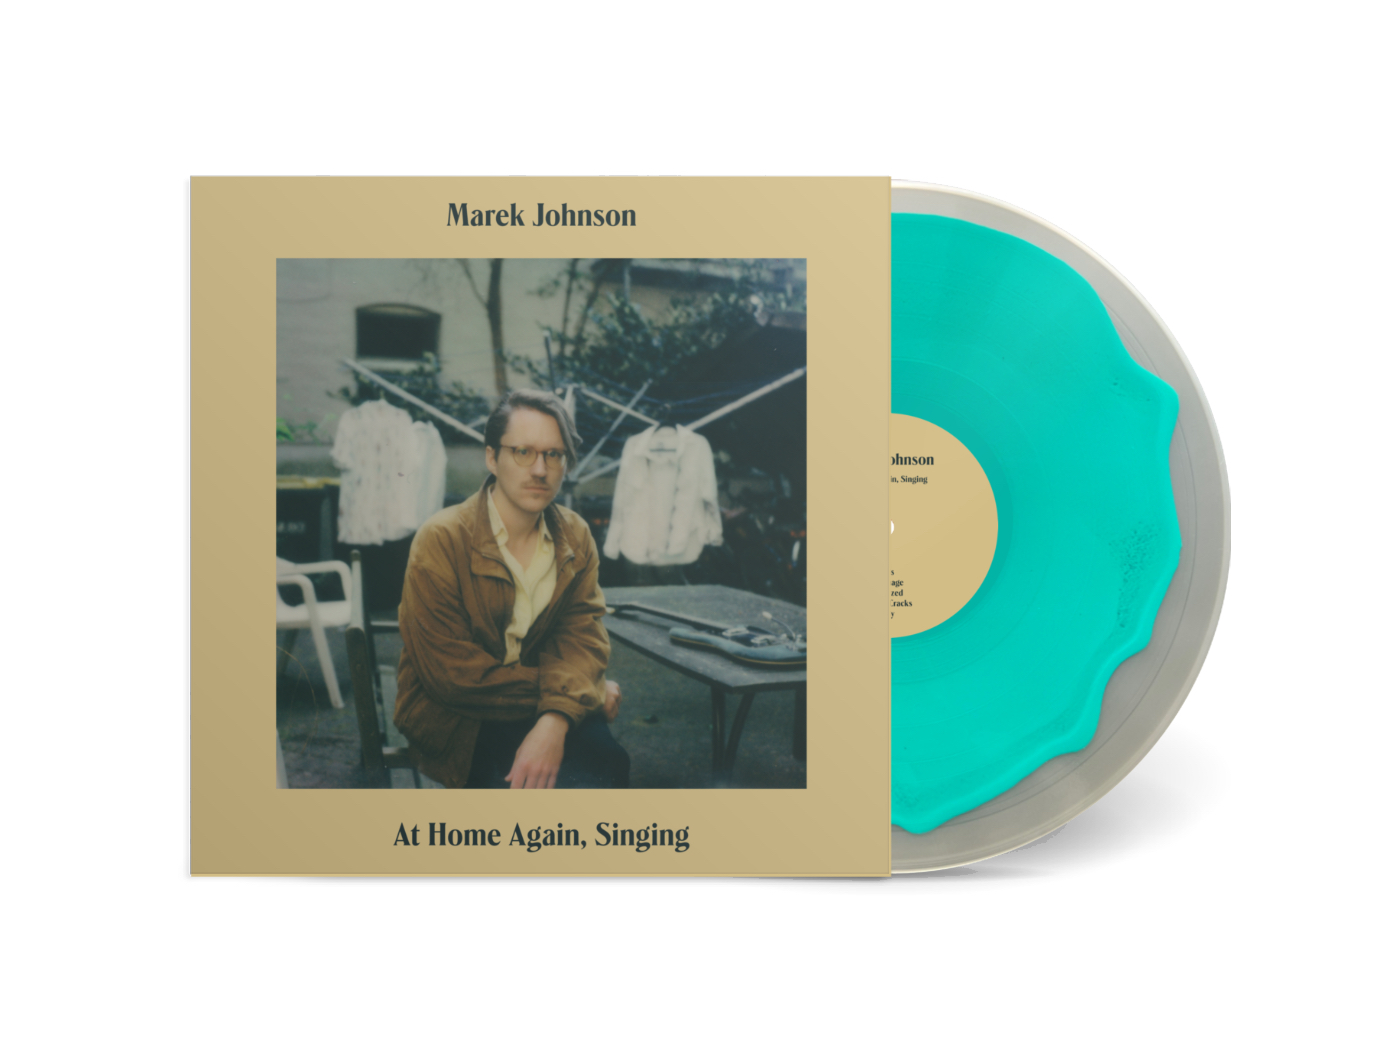 Out now: Marek Johnson’s “At Home Again, Singing” Vinyl LP